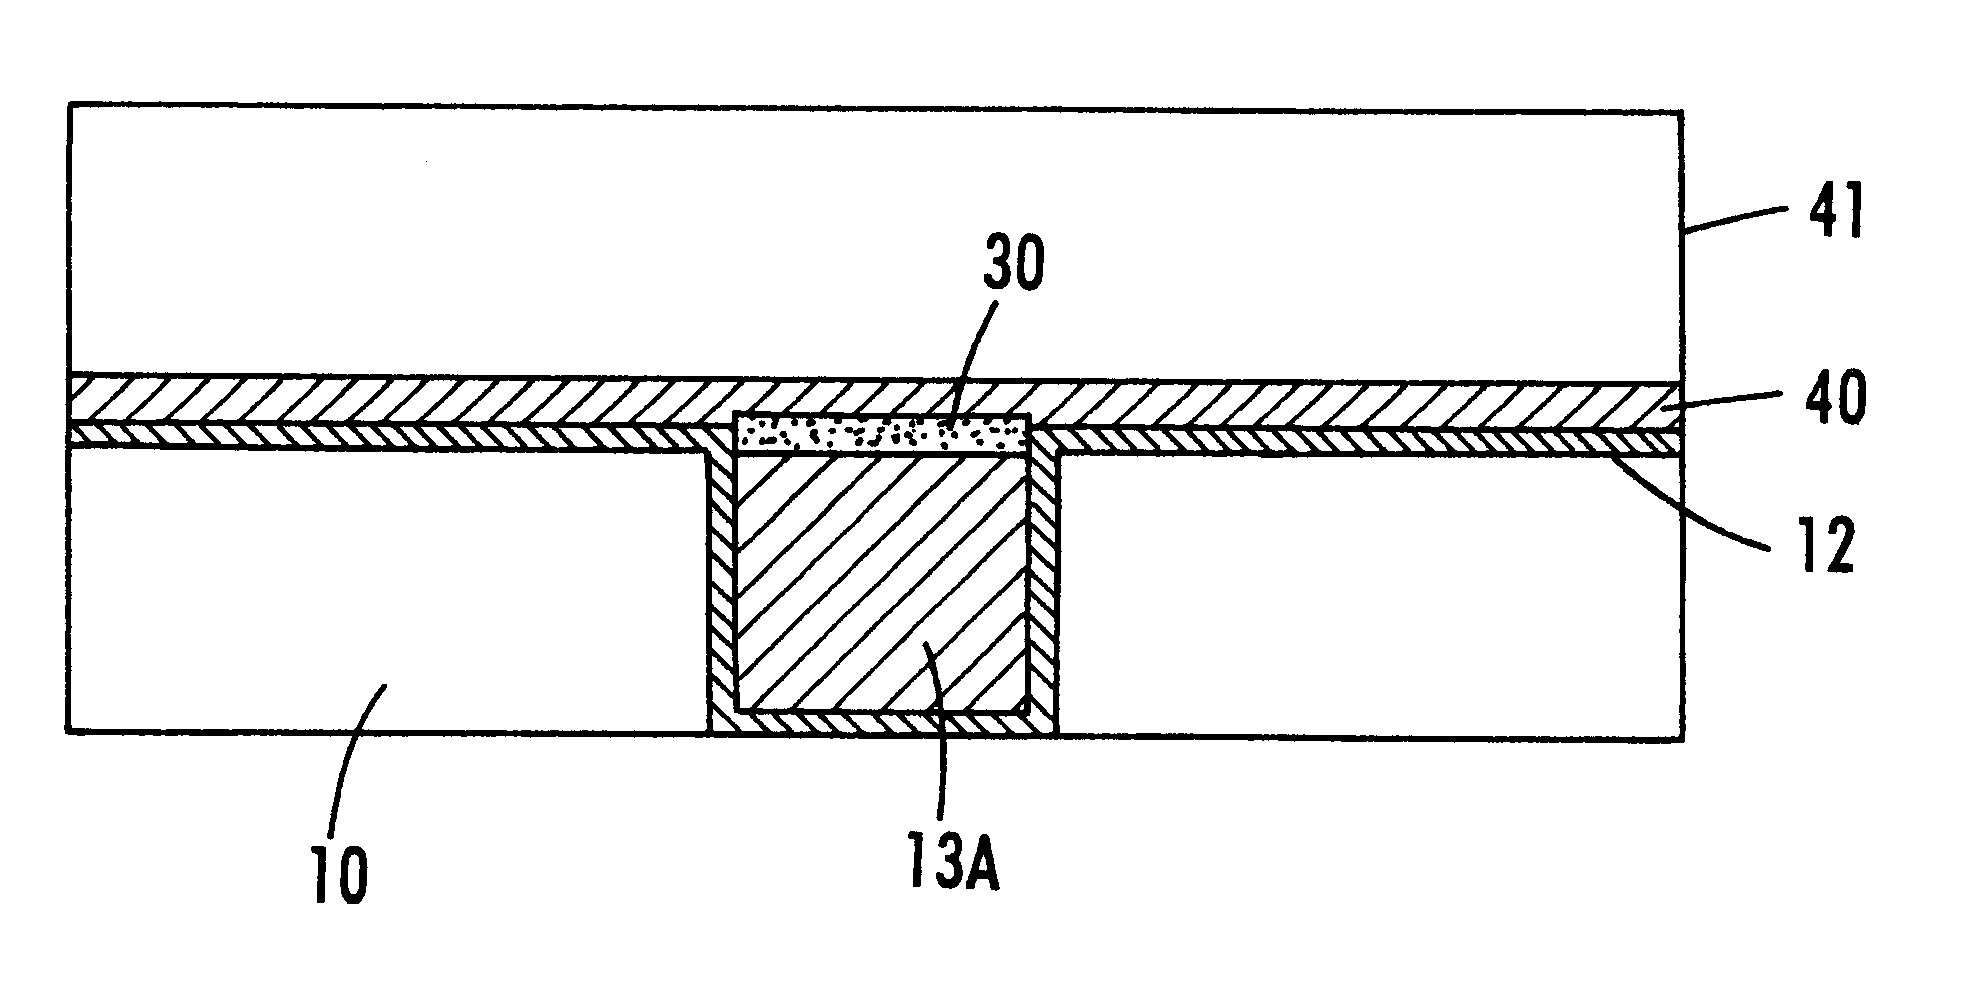 Method of improving adhesion of capping layers to copper interconnects